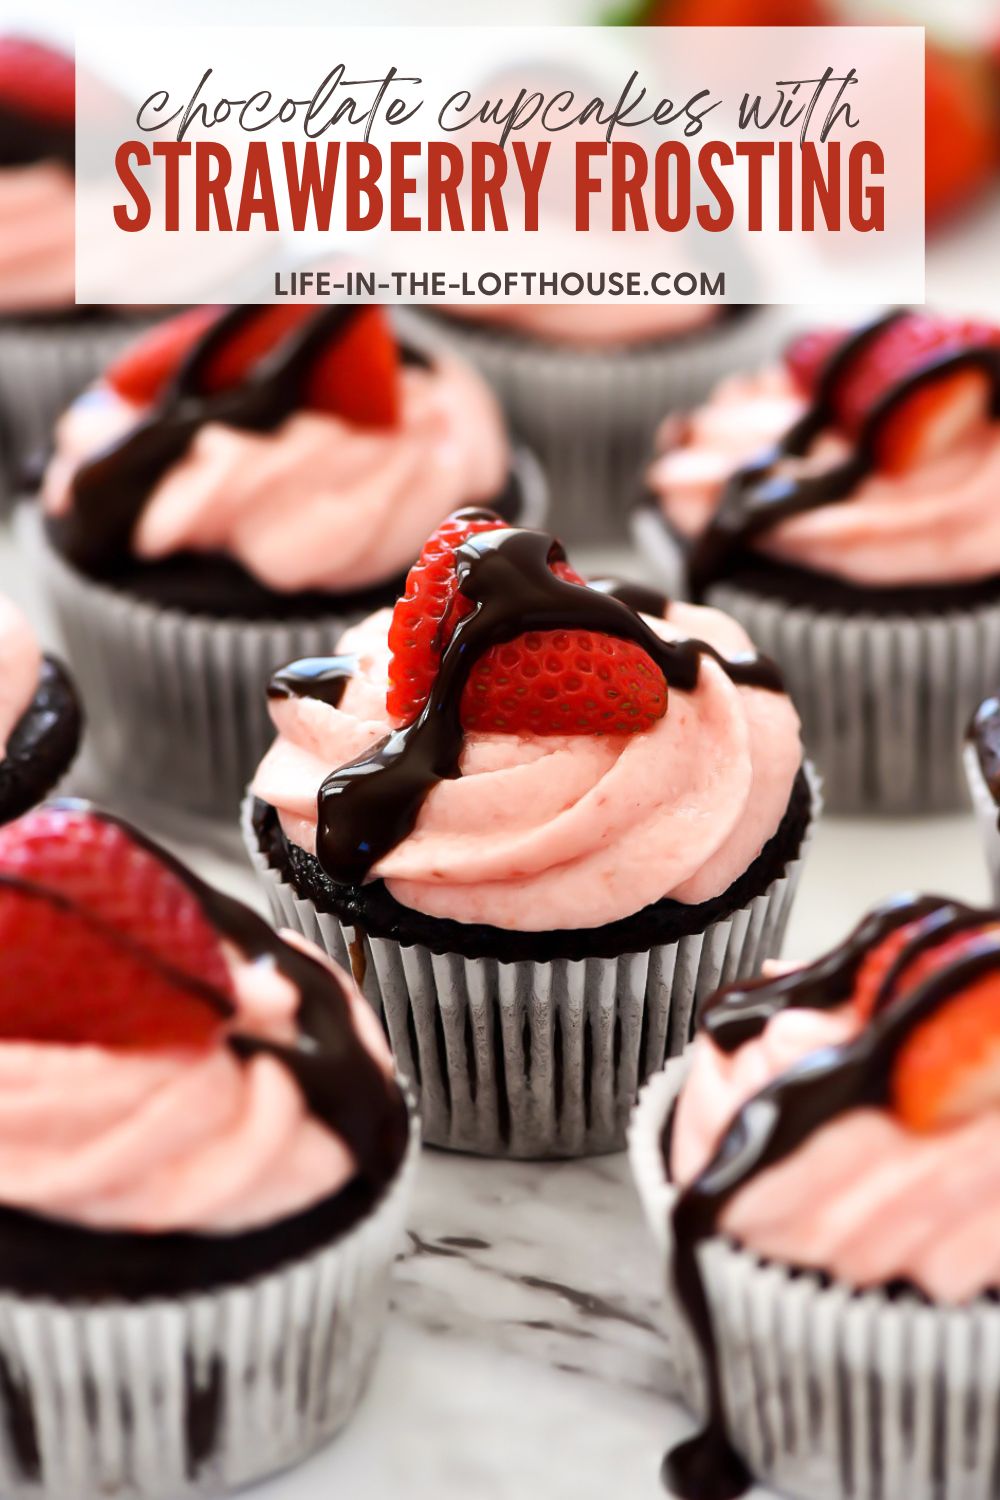 Chocolate Cupcakes topped with fresh strawberry frosting. Life-in-the-Lofthouse.com